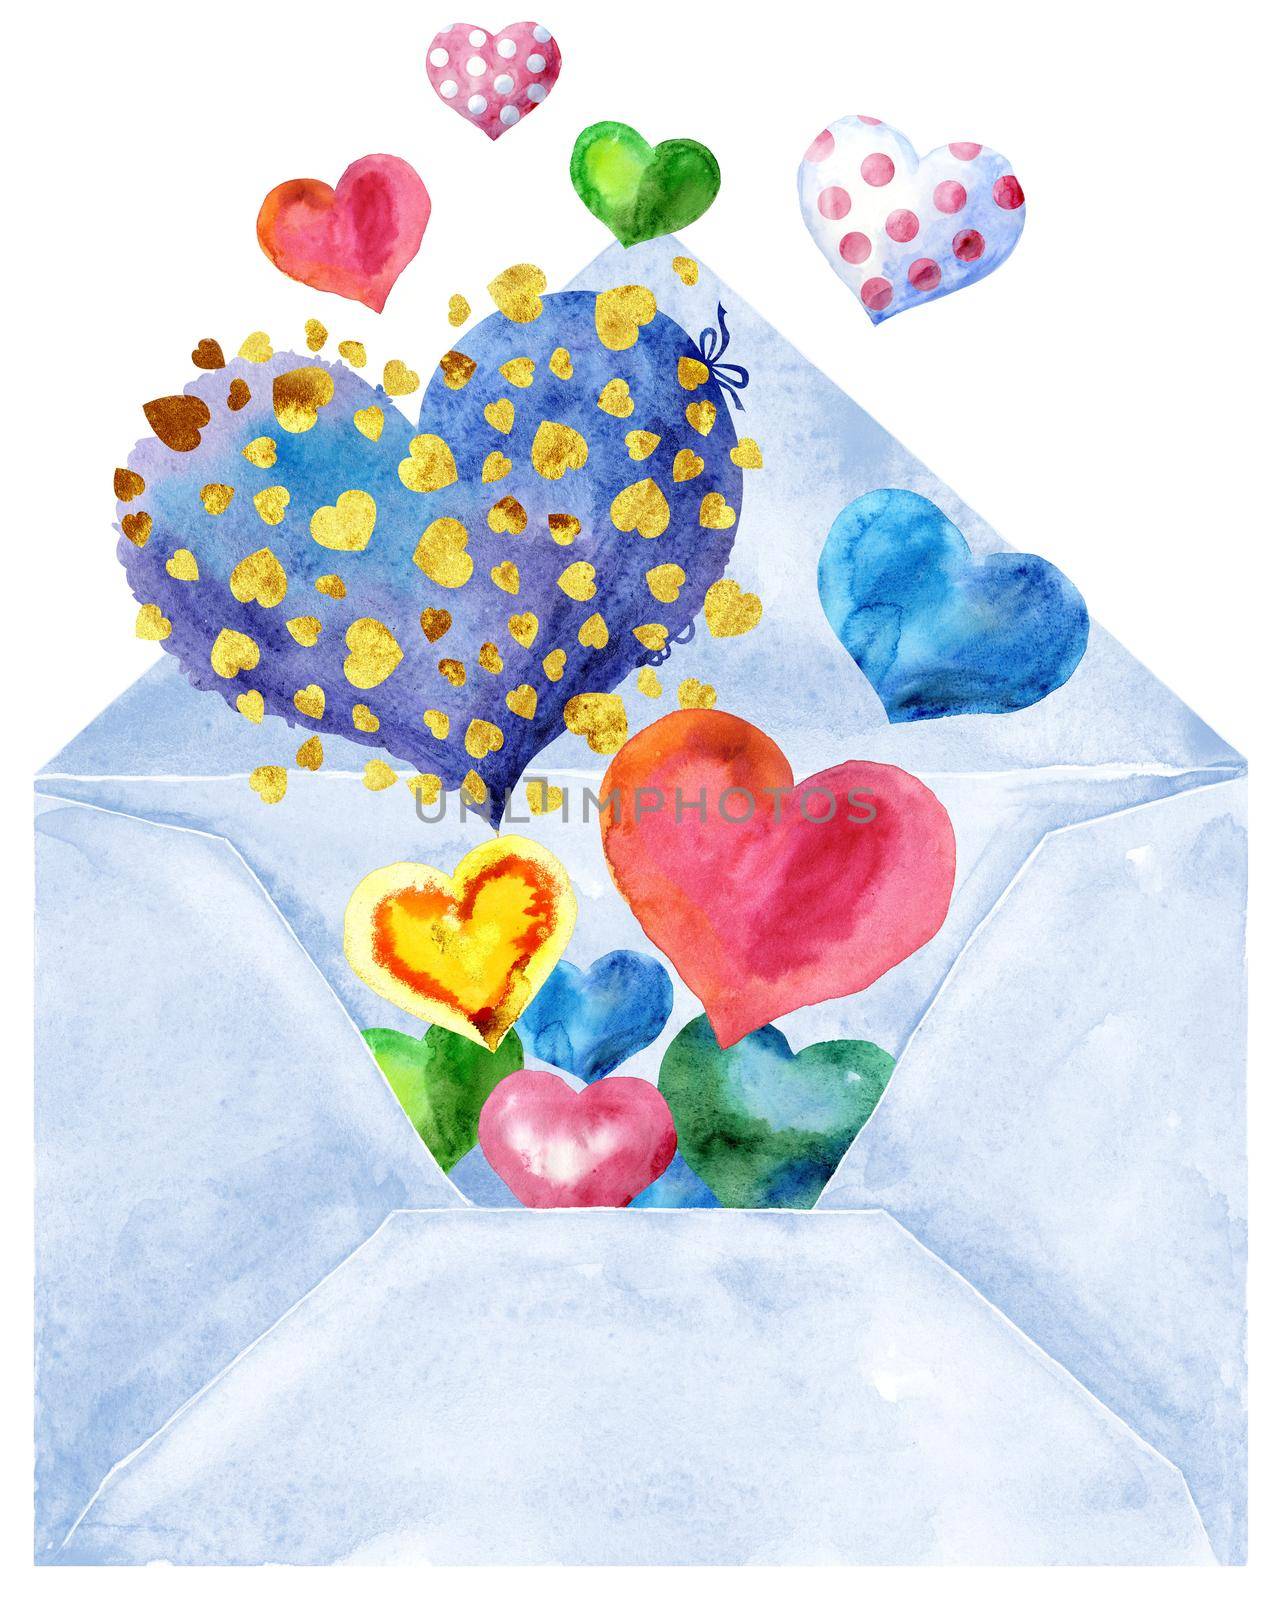 Watercolor hand-drawn illustration of an envelope with hearts on a white background isolated